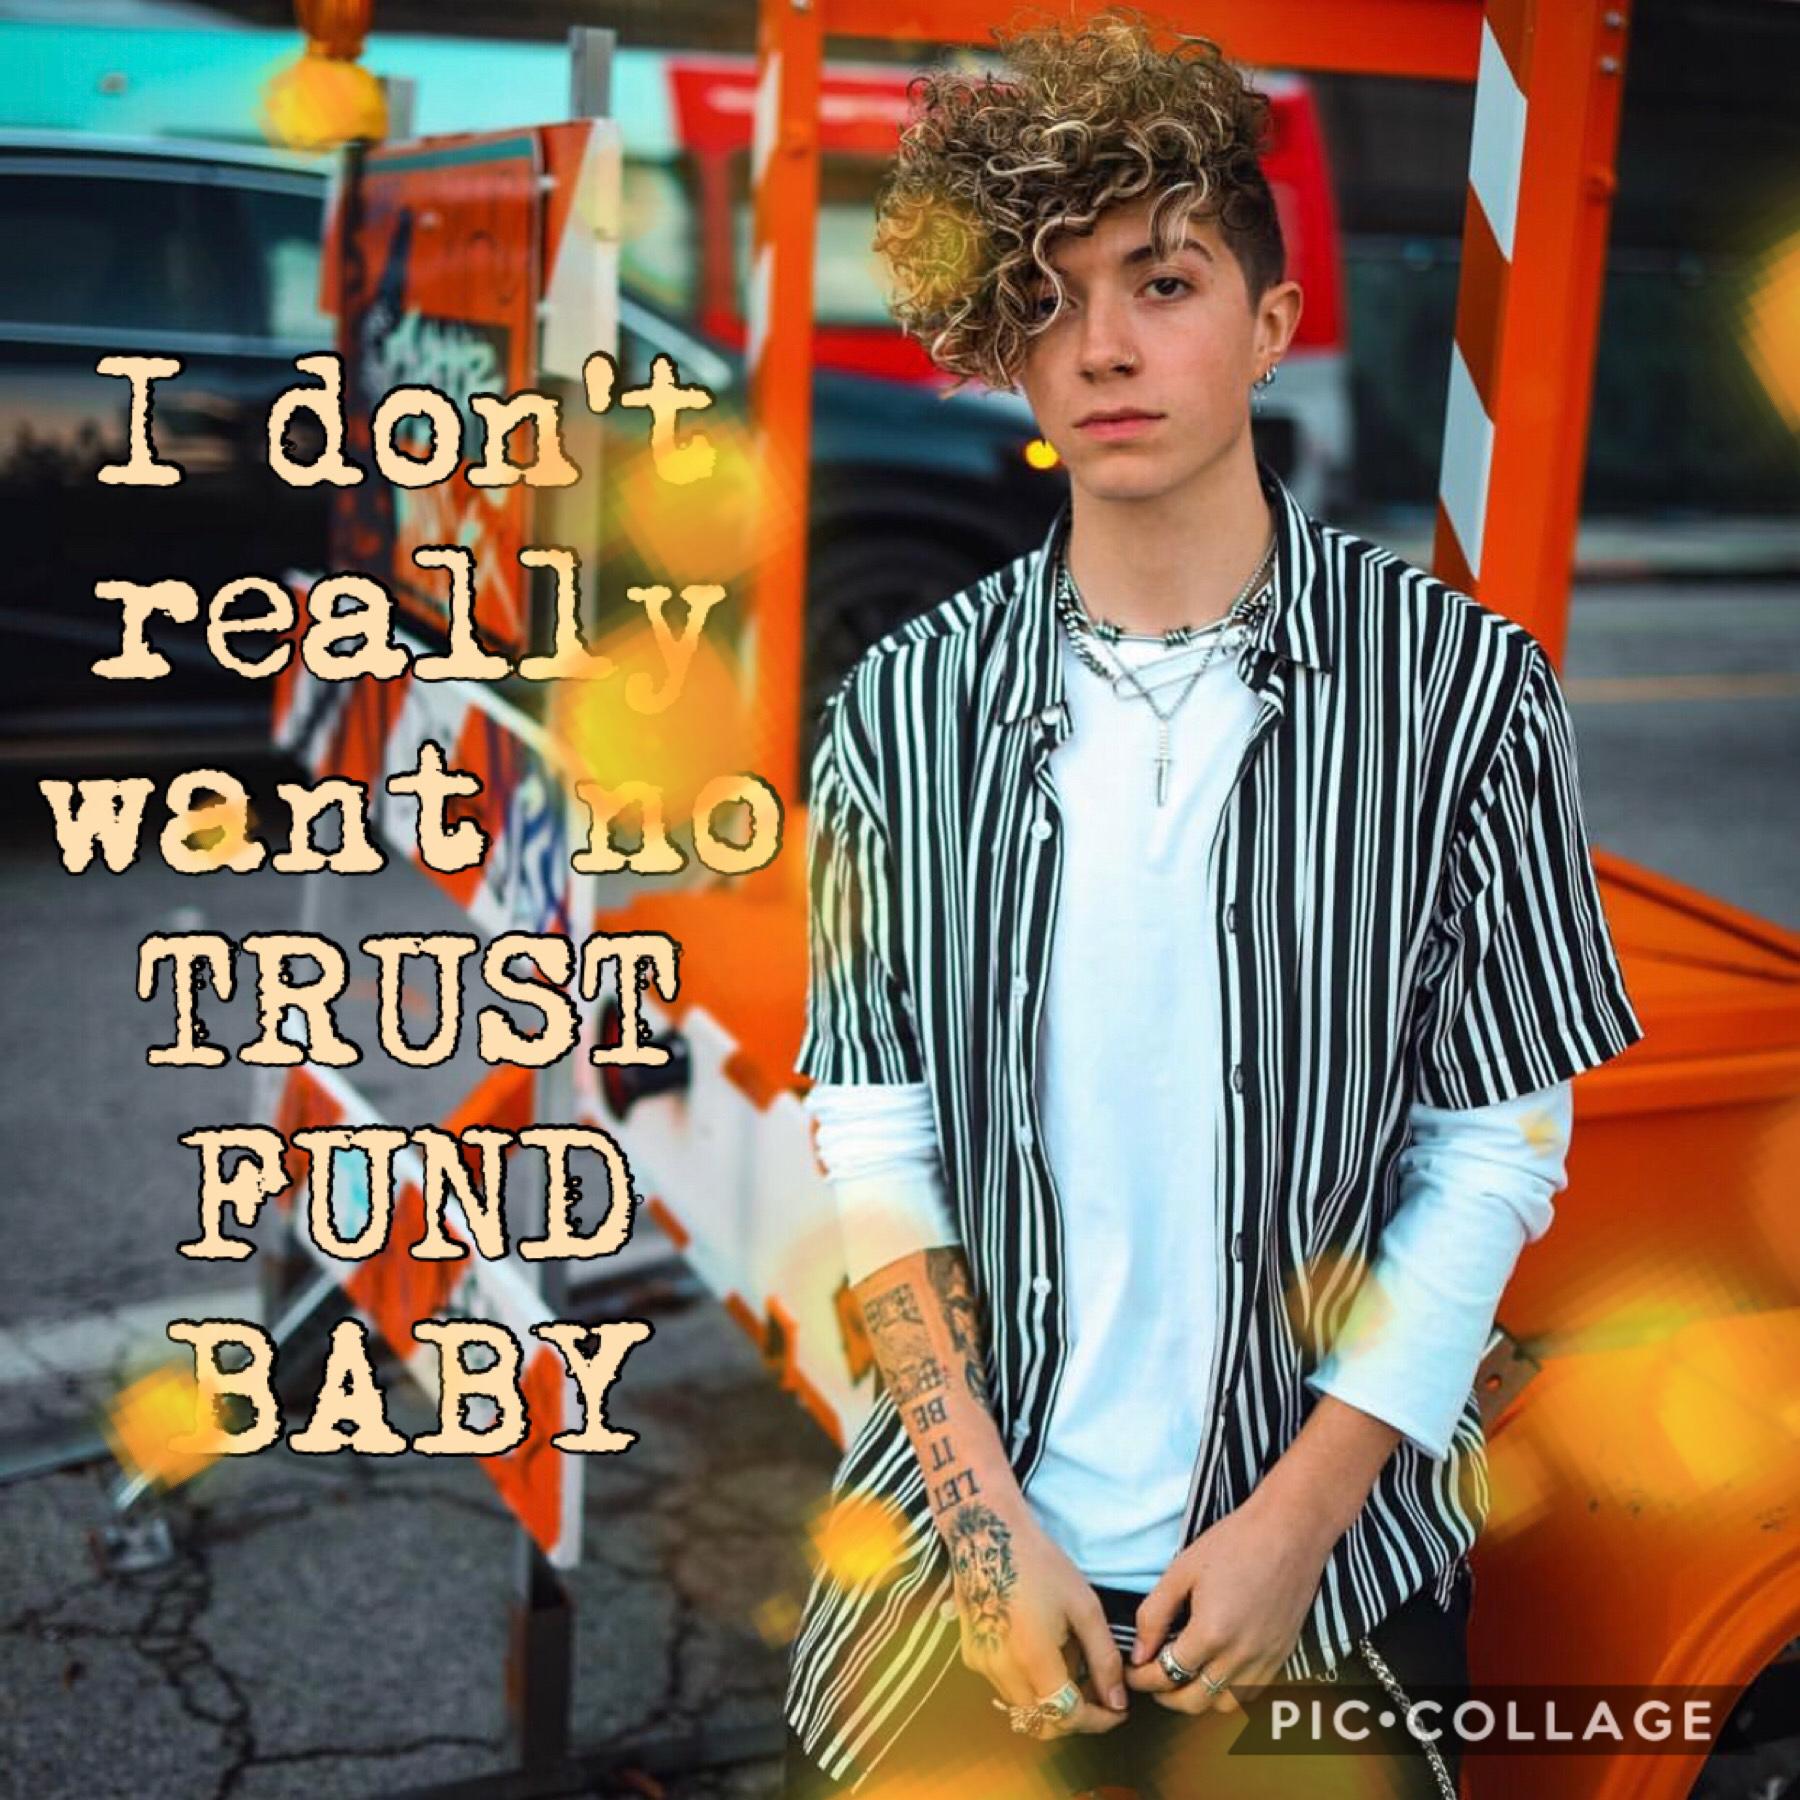 Trust fund baby by why don’t we